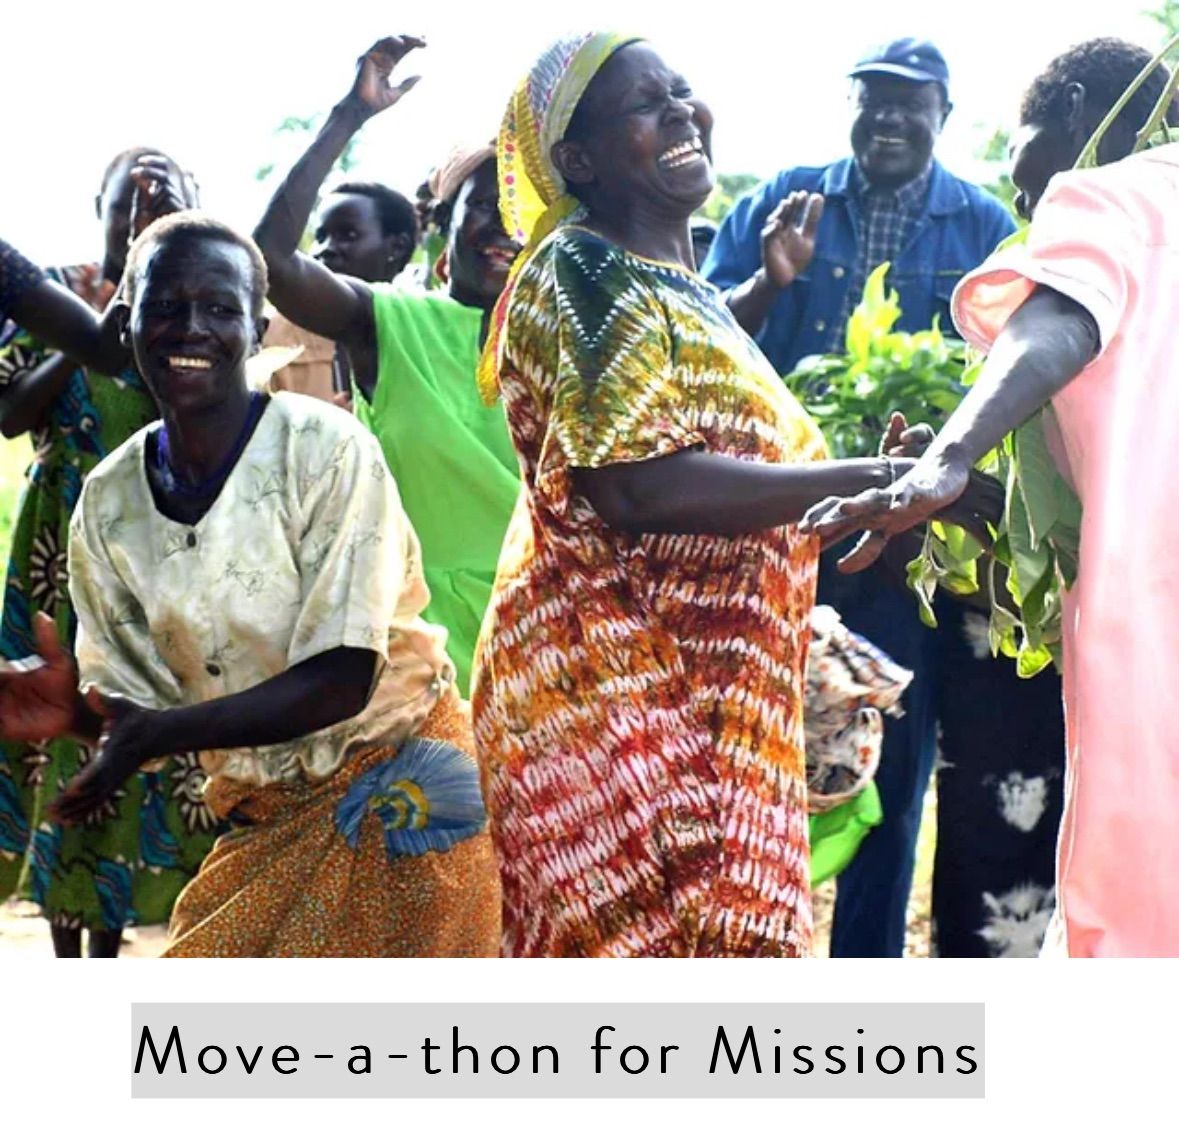 Move-a-thon for Missions:  a drumstick and dance-fitness fundraising event!